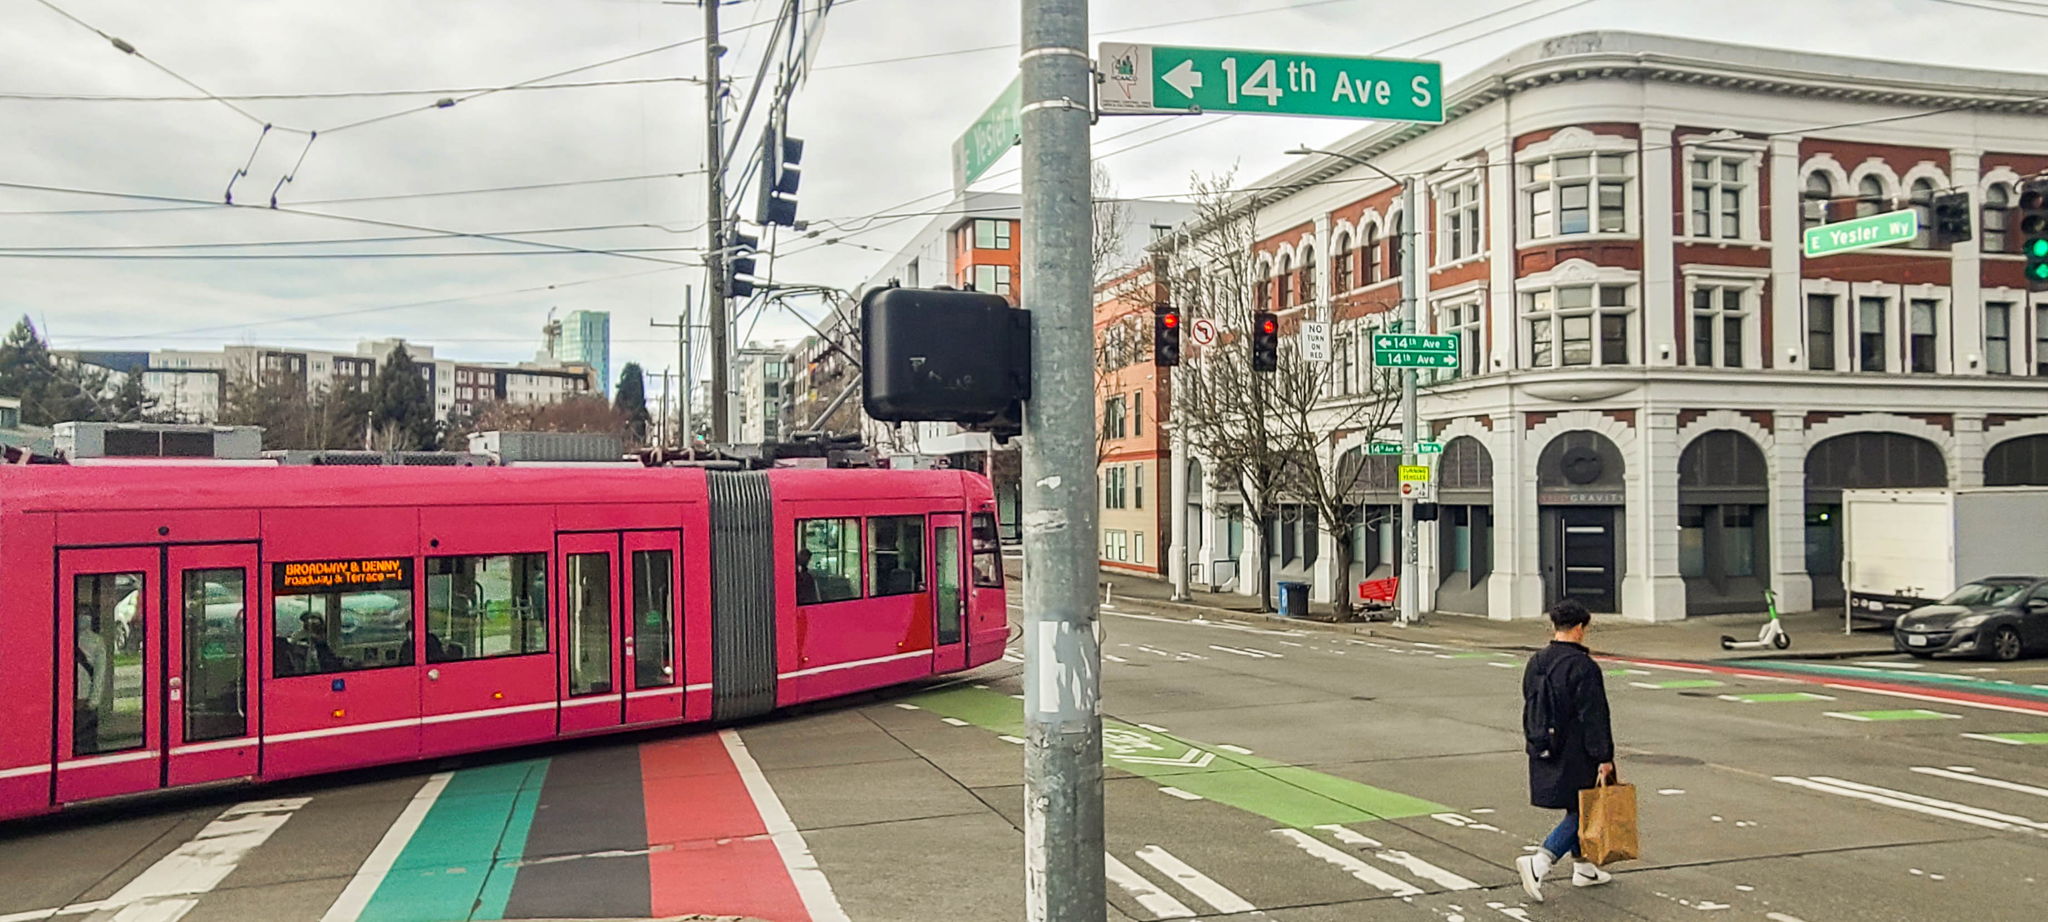 SEATTLE STREETCAR:  Hop on the trolley just a block away to explore the International District, downtown, First Hill, and Capitol Hill.